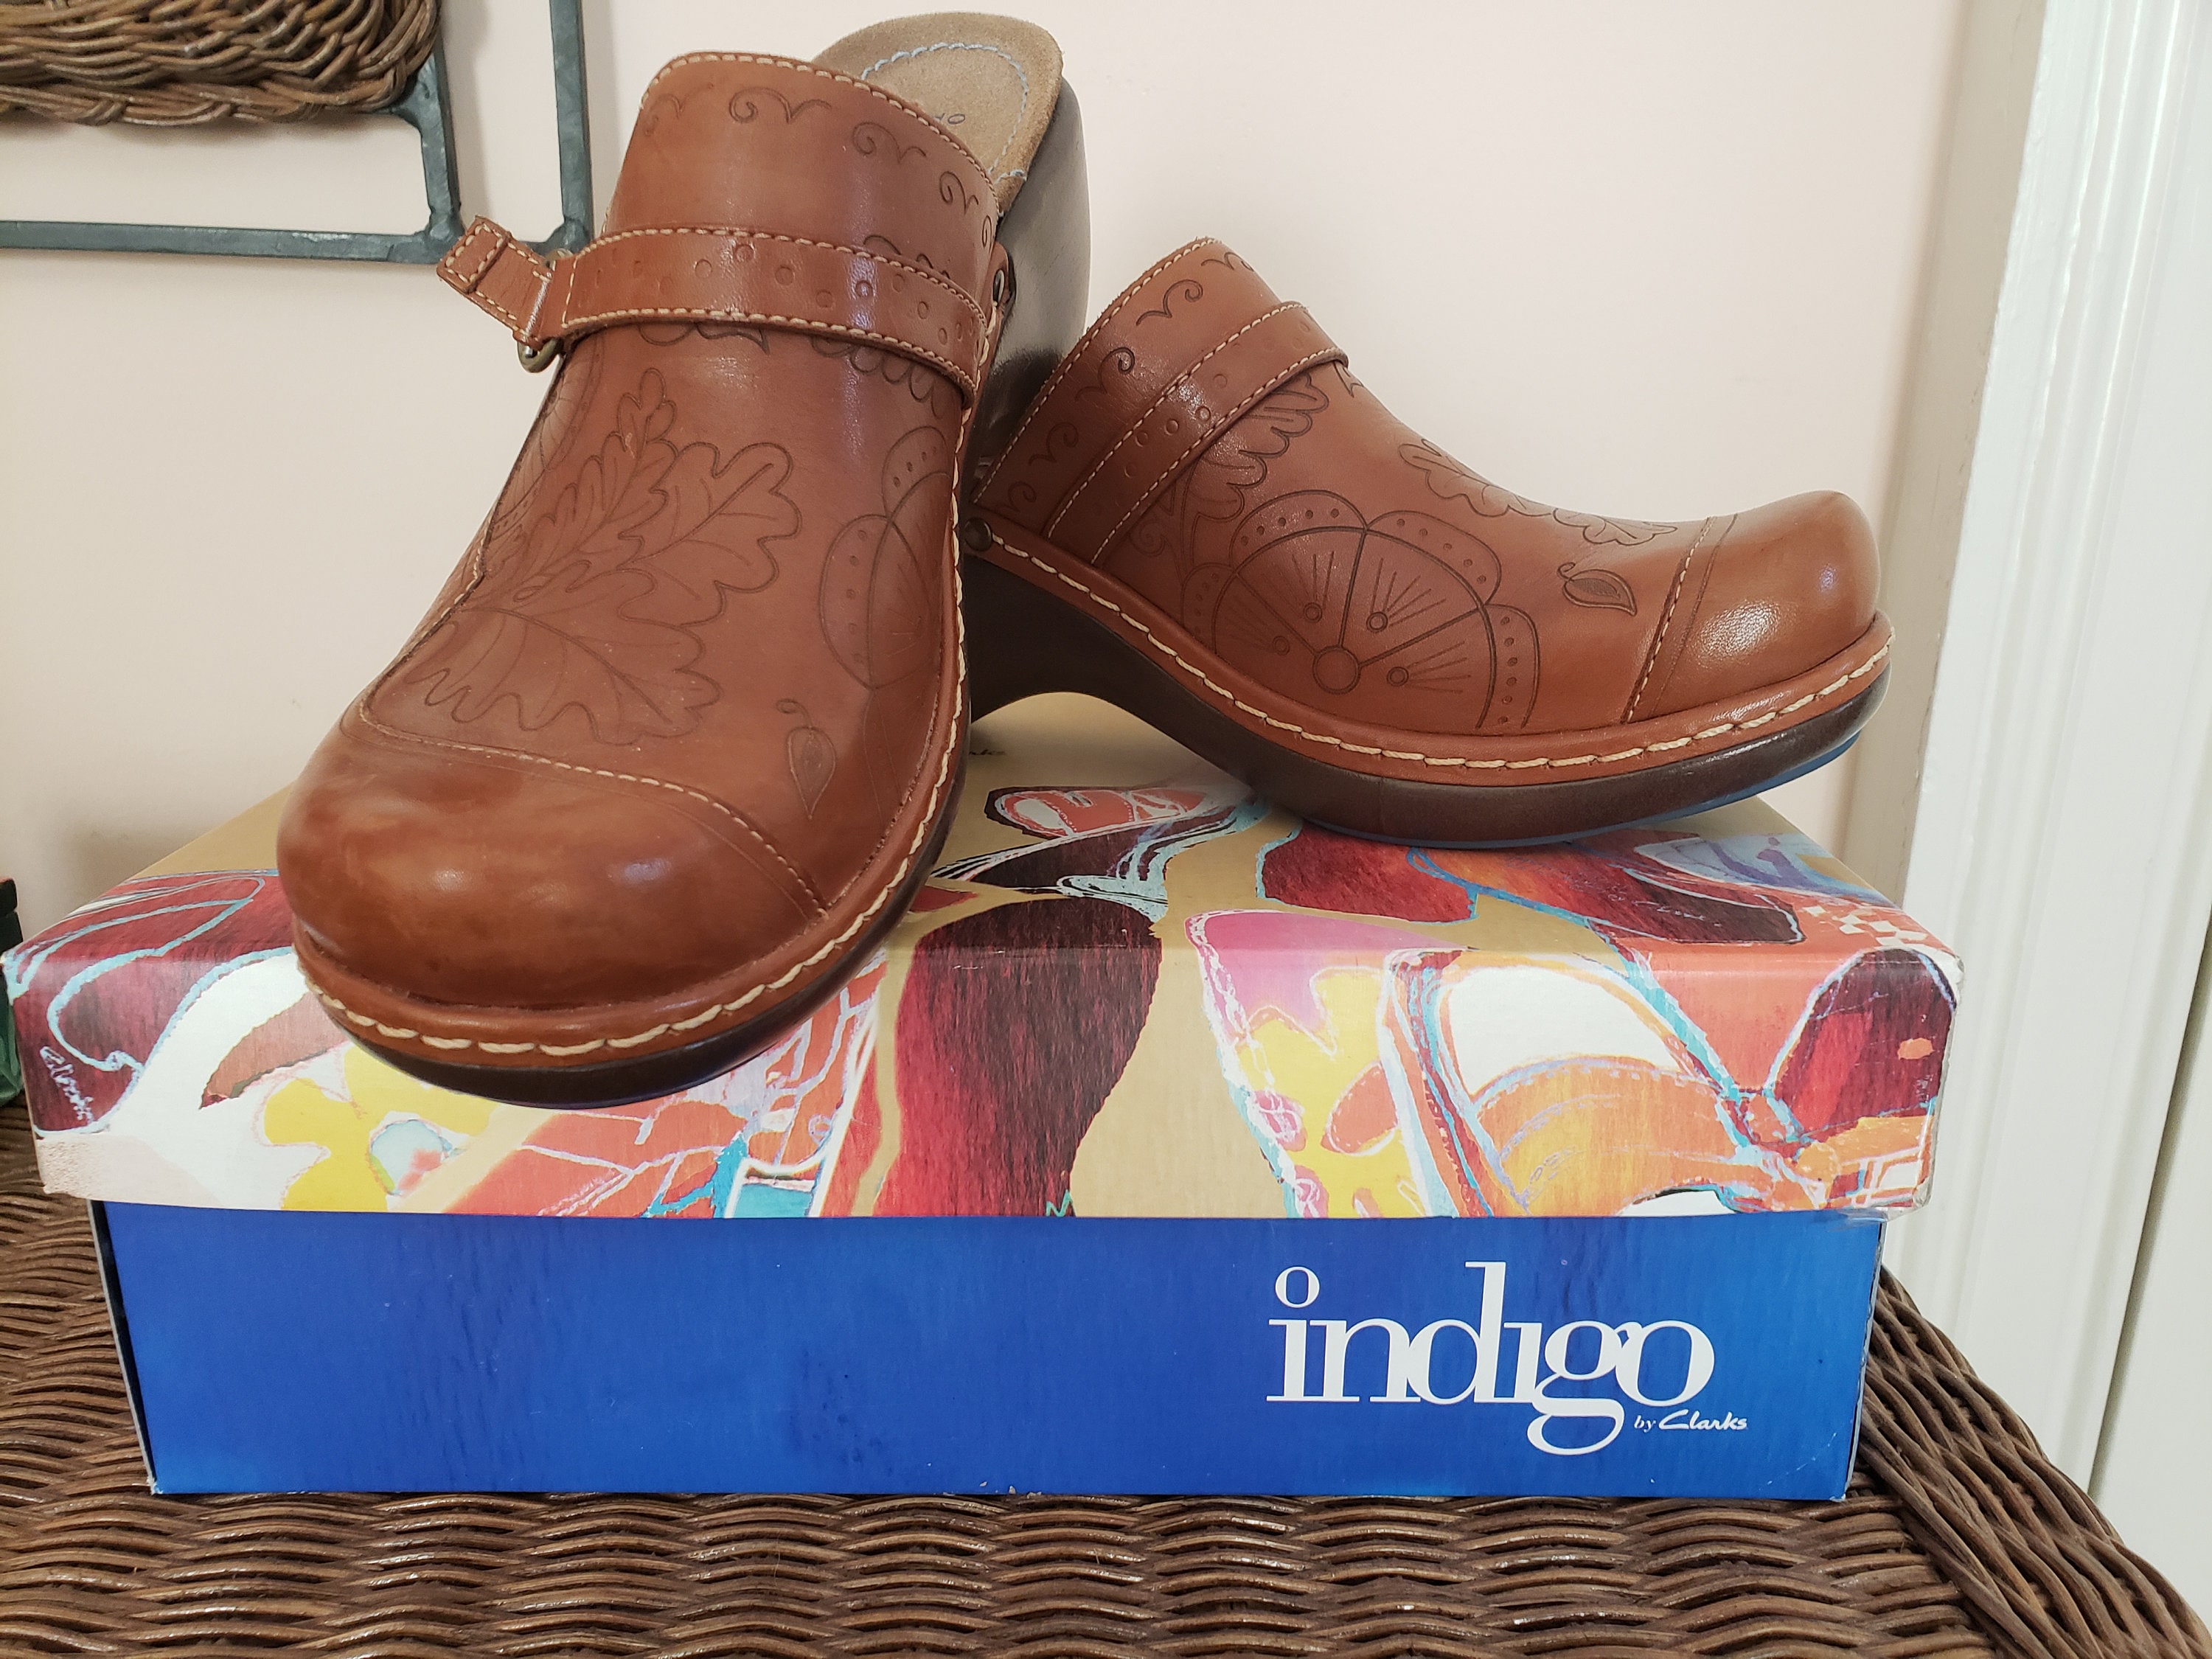 Vintage Indigo by Clarks leather embossed clog Oceania style US womens size 8m in worn